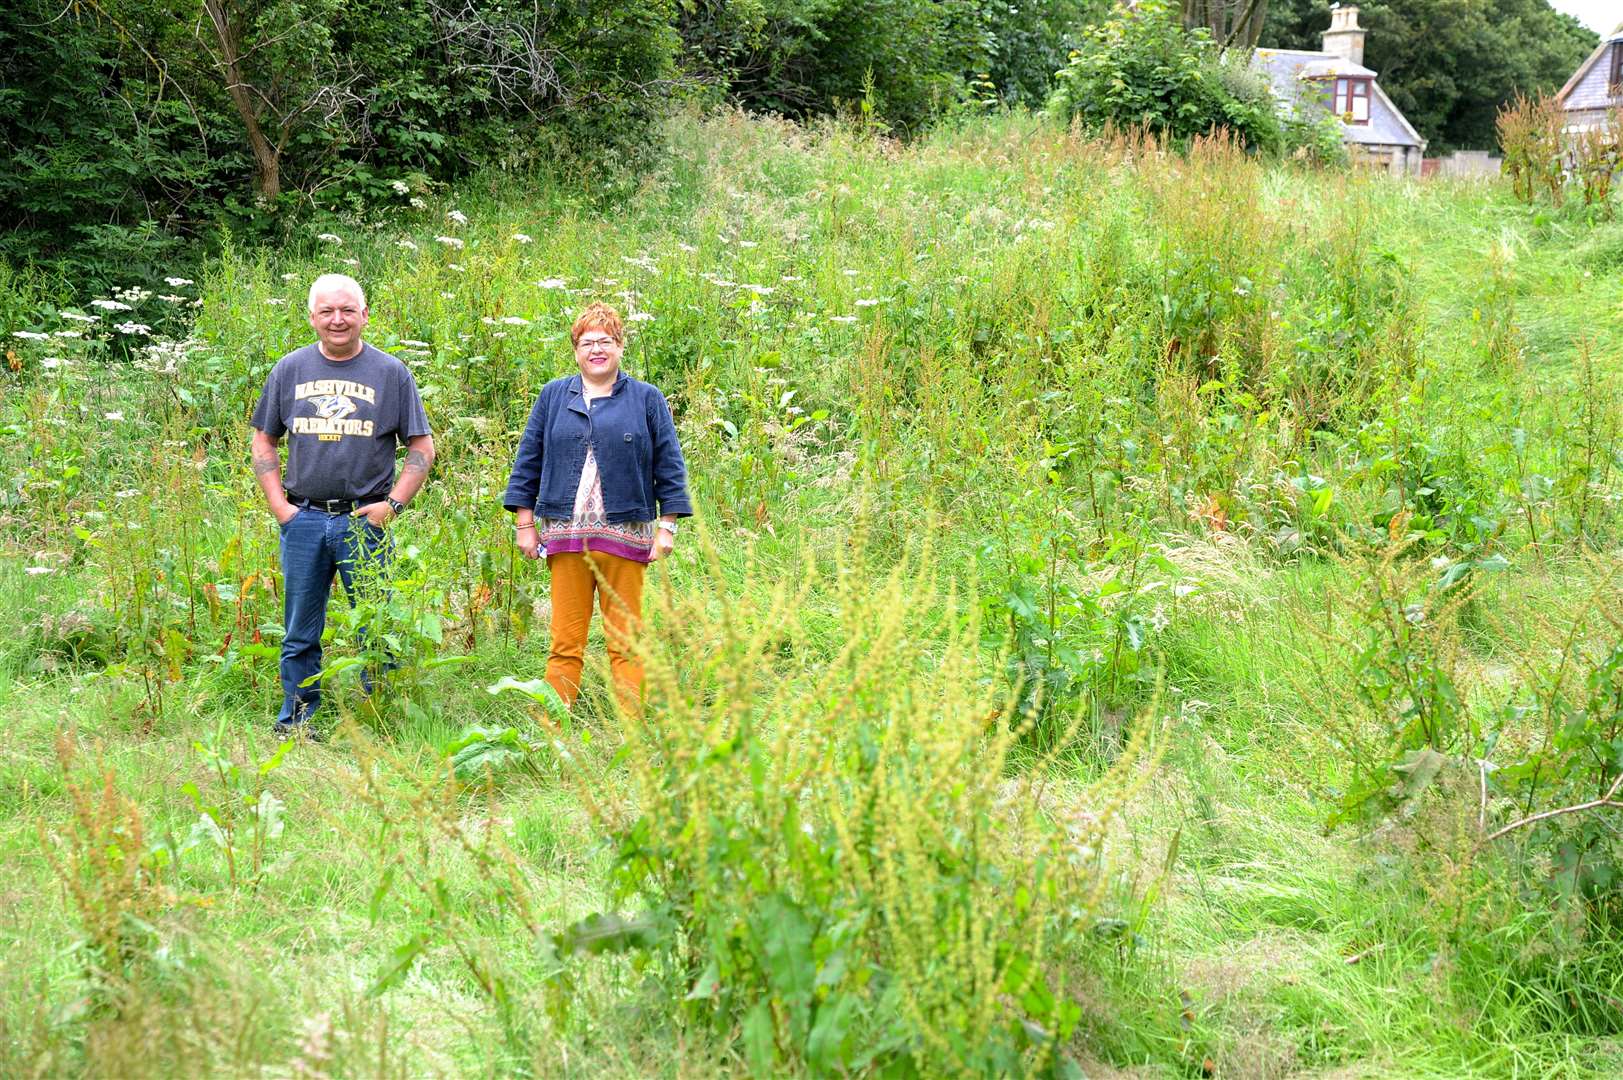 Welcome to the jungle...Buckie and District Community Council chairman Kevin Mckay and community councillor Christine Allan in what has become a woldnerness area near the Victoria Bridge in Buckie. Picture: Eric Cormack. Image No. 044428